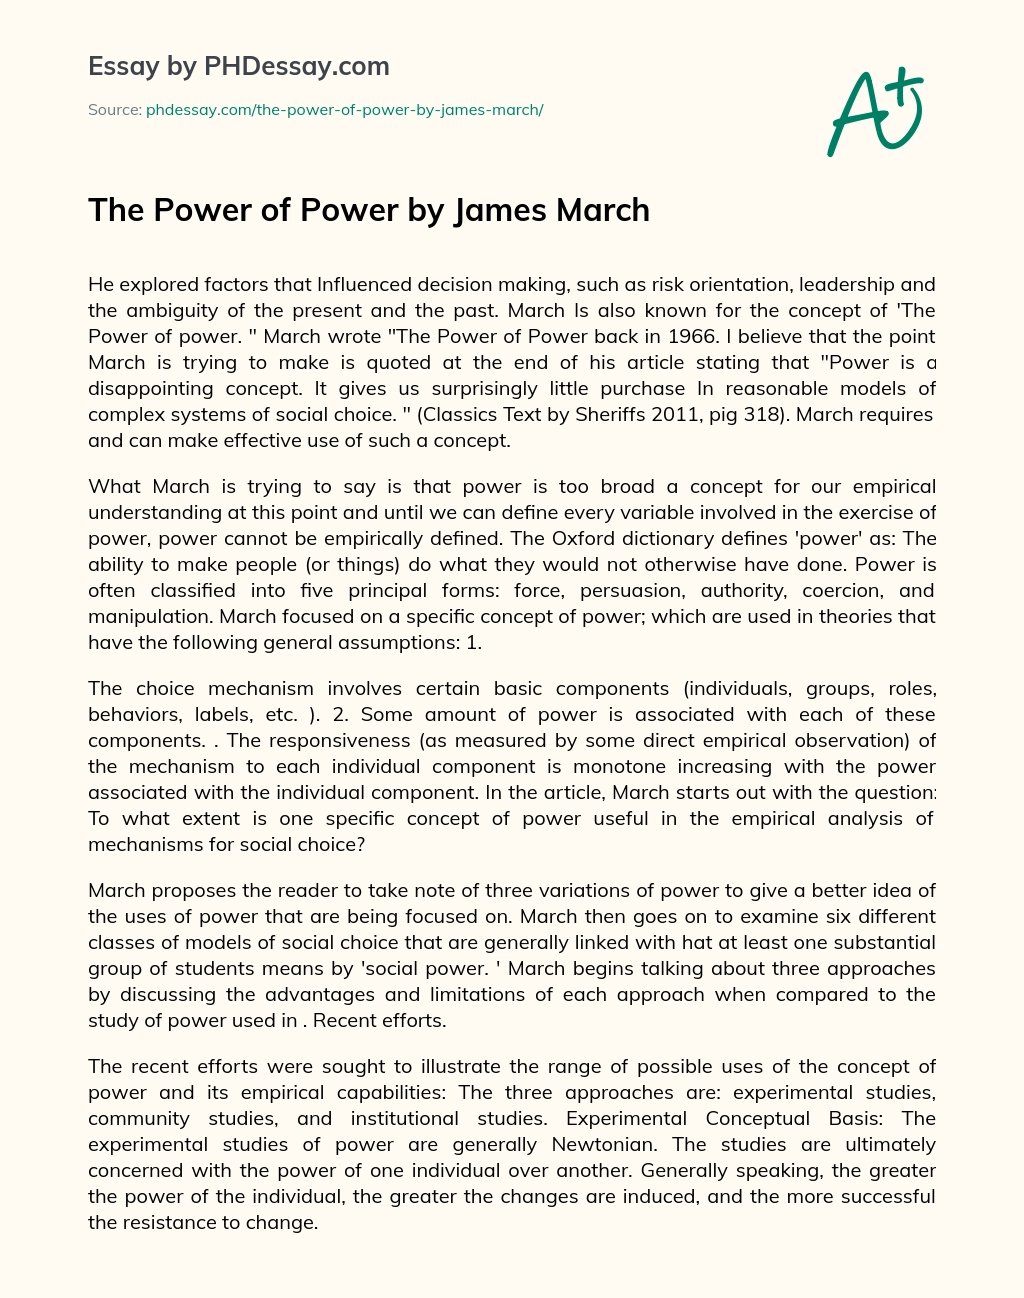 The Power of Power by James March essay